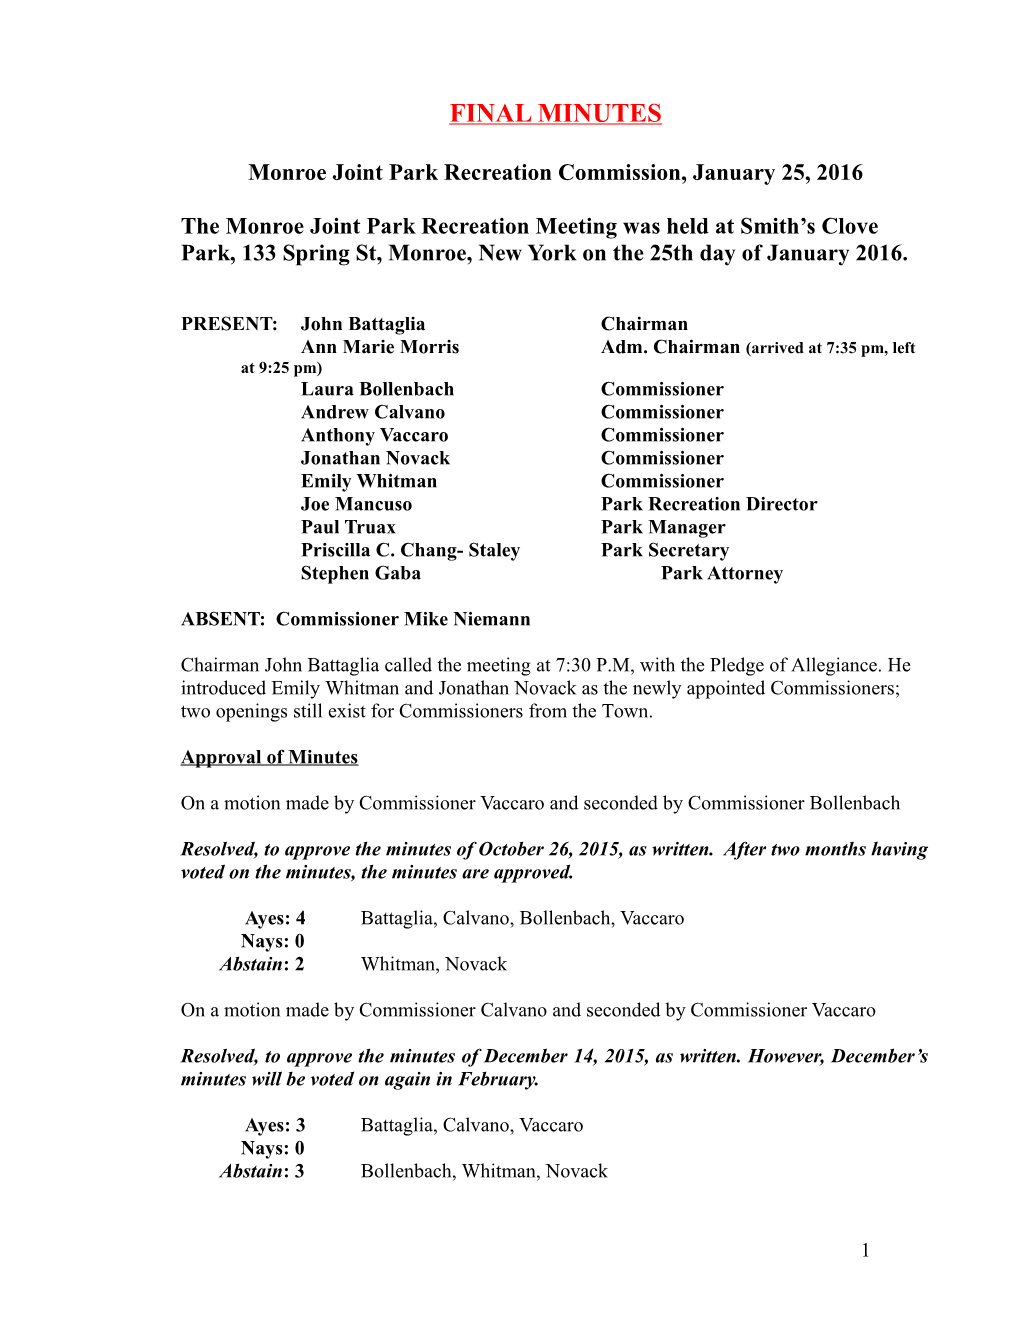 Monroe Joint Park Recreation Commission, January 25, 2016